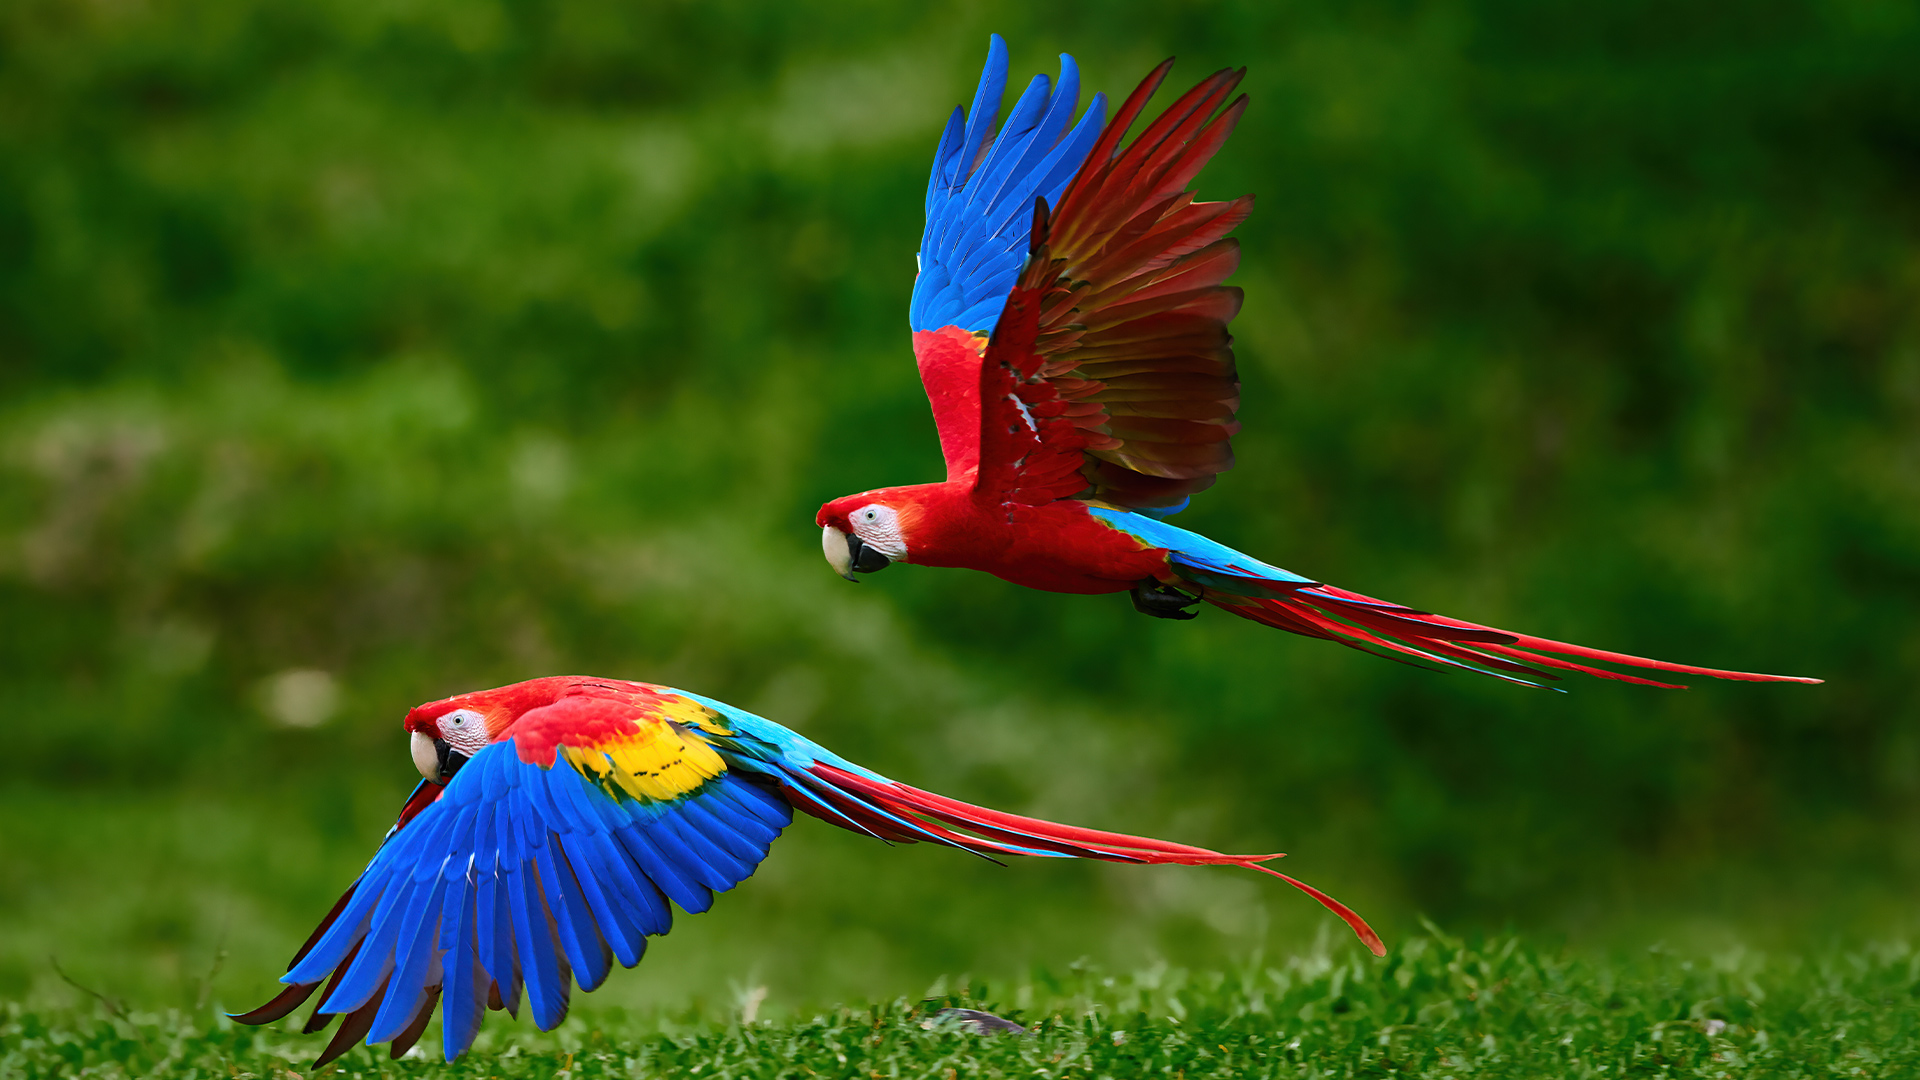 Destinations: Two scarlet Macaw parrots flying with outstretched wings just above the ground in a Tropical Rainforest in Costa Rica, South America